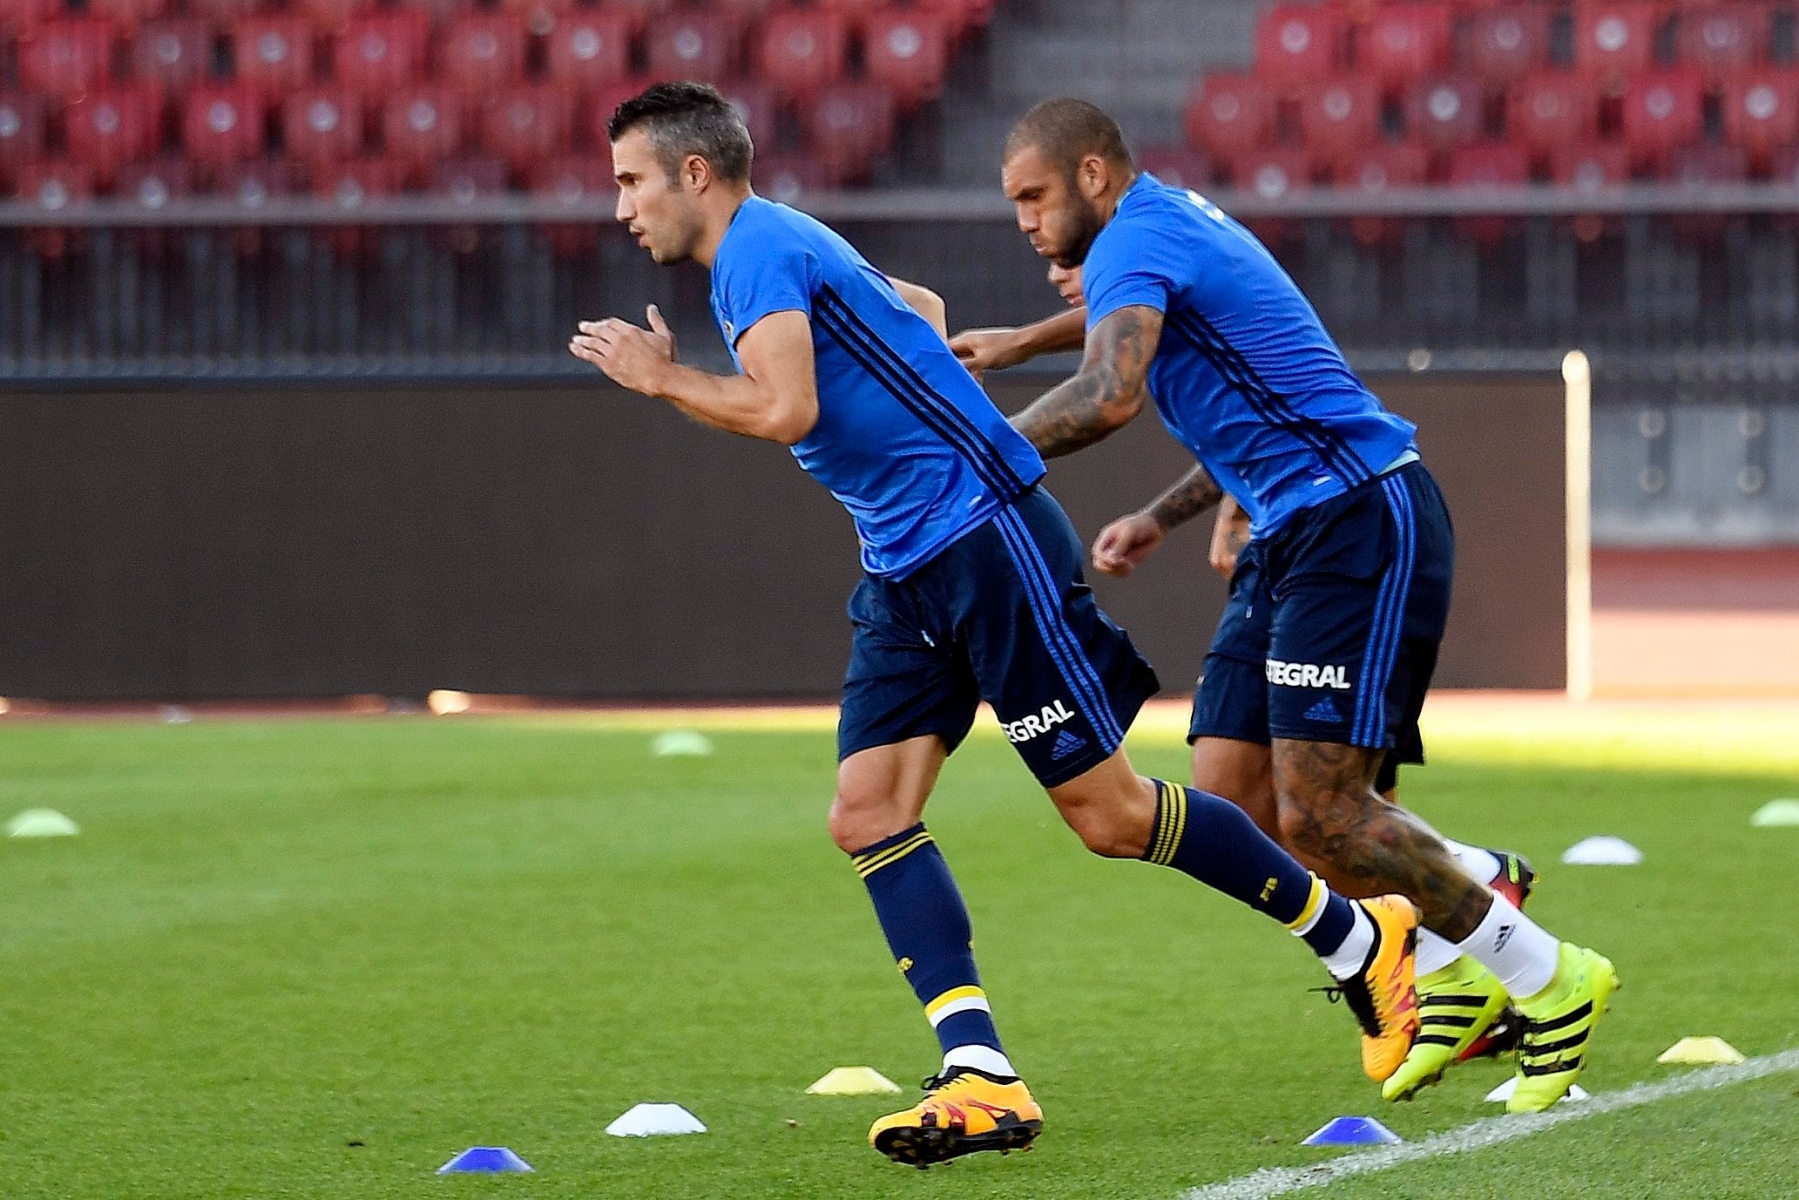 Fenerbahce Istanbul players Robin van Persie, left, and Fernando, right, during a training session in Zurich, Switzerland. Wednesday, August 24, 2016. Switzerland`s Grasshopper Club Zurich will play against Turkey`s Fenerbahce Istanbul in an UEFA Europa League qualification game in Zurich, Switzerland. Thursday, August 25, 2016. (KEYSTONE/Walter Bieri) SWITZERLAND SOCCER FENERBAHCE ISTANBUL